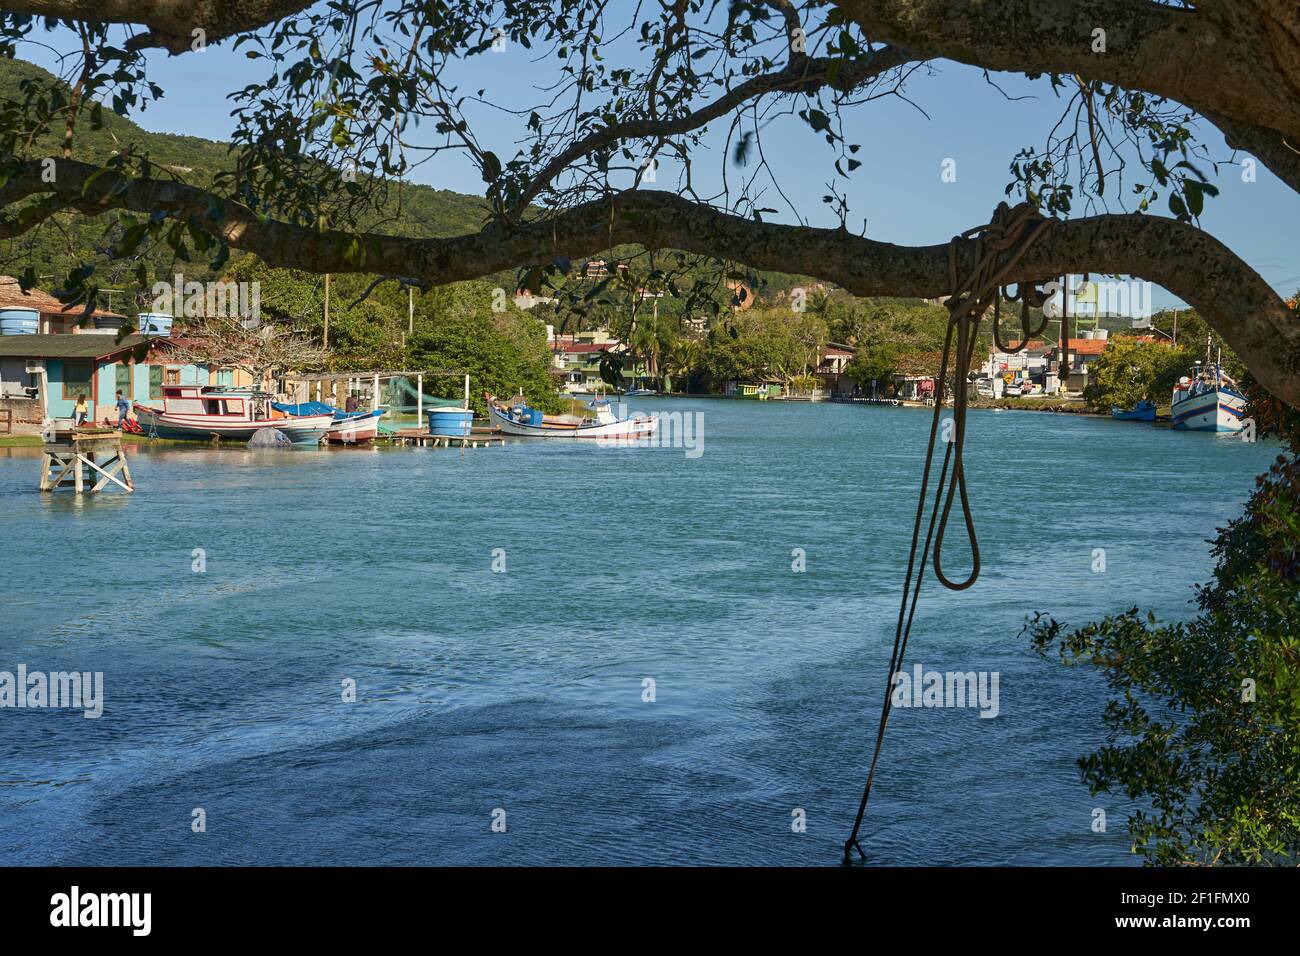 beautiful river landscape with old wooden buildings, wooden boats and a rope hanging from a tree. Tranquil turquoise river meandering through a pretty Stock Photo